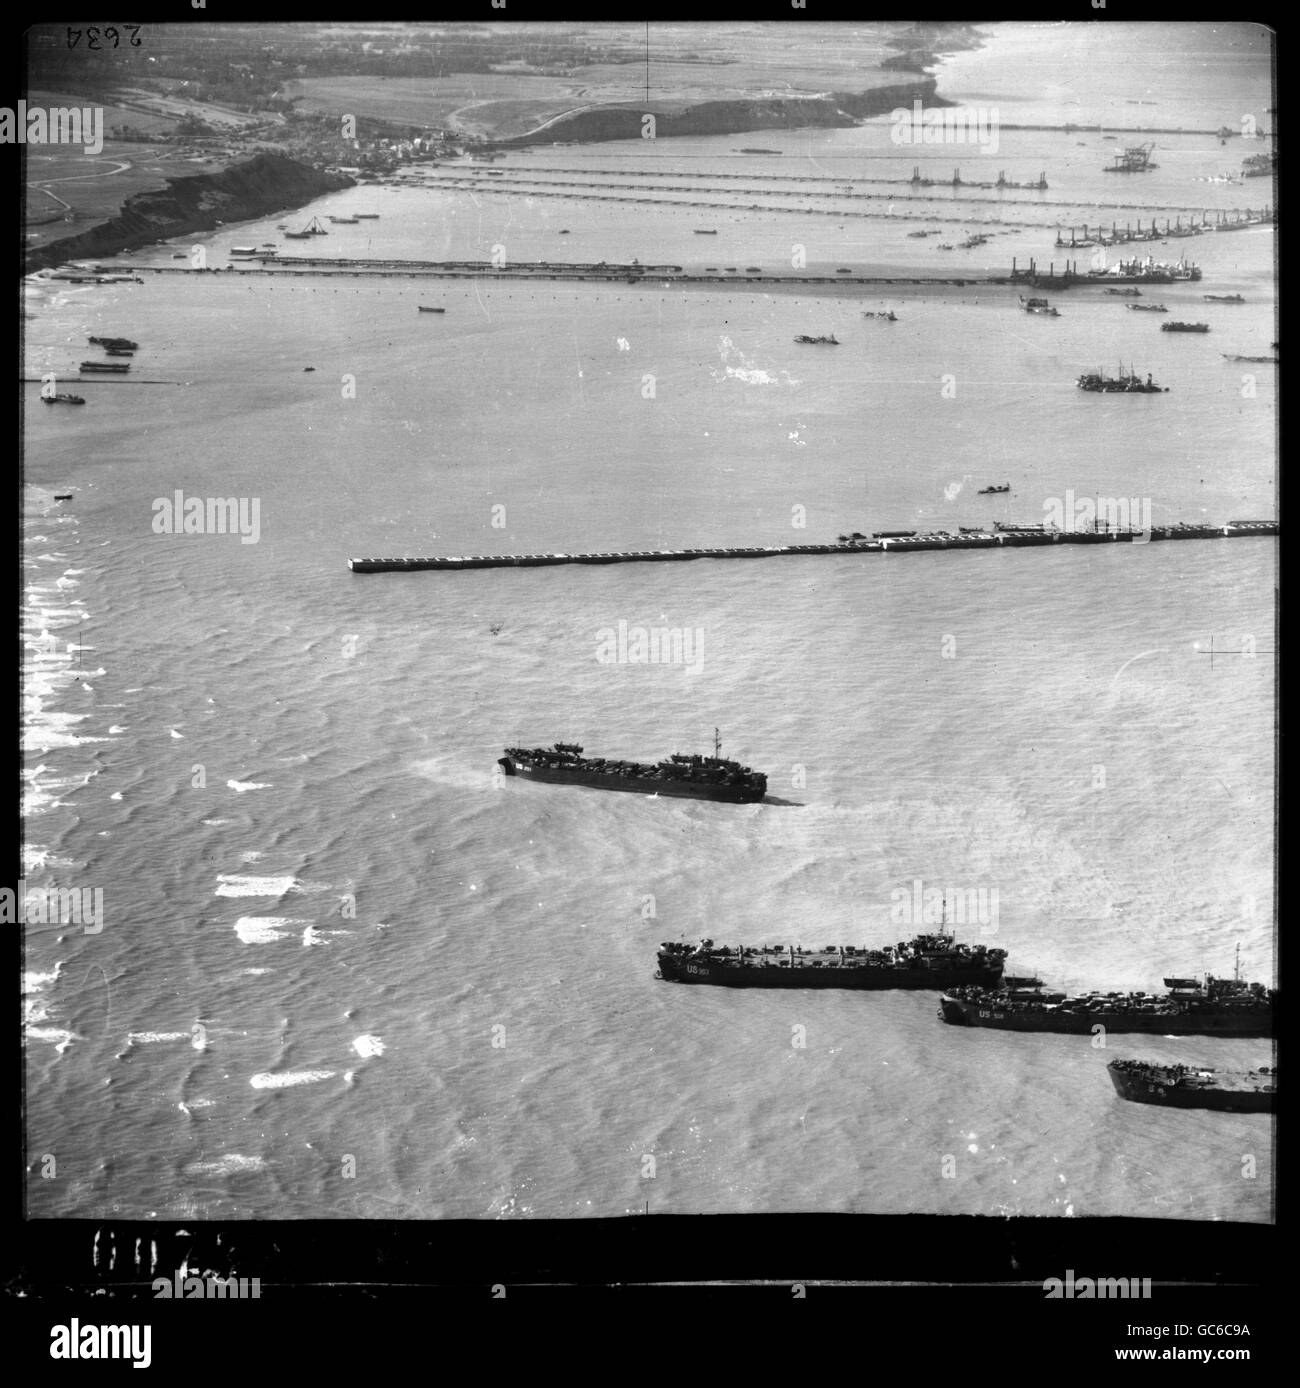 - MANDATORY CREDIT CROWN COPYRIGHT/RCAHMS Mulberry B created by the British at Arromanches, Normandy, France. This oblique image was taken by the Royal Air Force on 2 October 1944 and is an image from The Aerial reconnaissance Archive (TARA) whose custodian is the Royal Commission on the Ancient and Historical Monuments of Scotland (RCAHMS) and which from this Monday, be available on-line to the public. Stock Photo